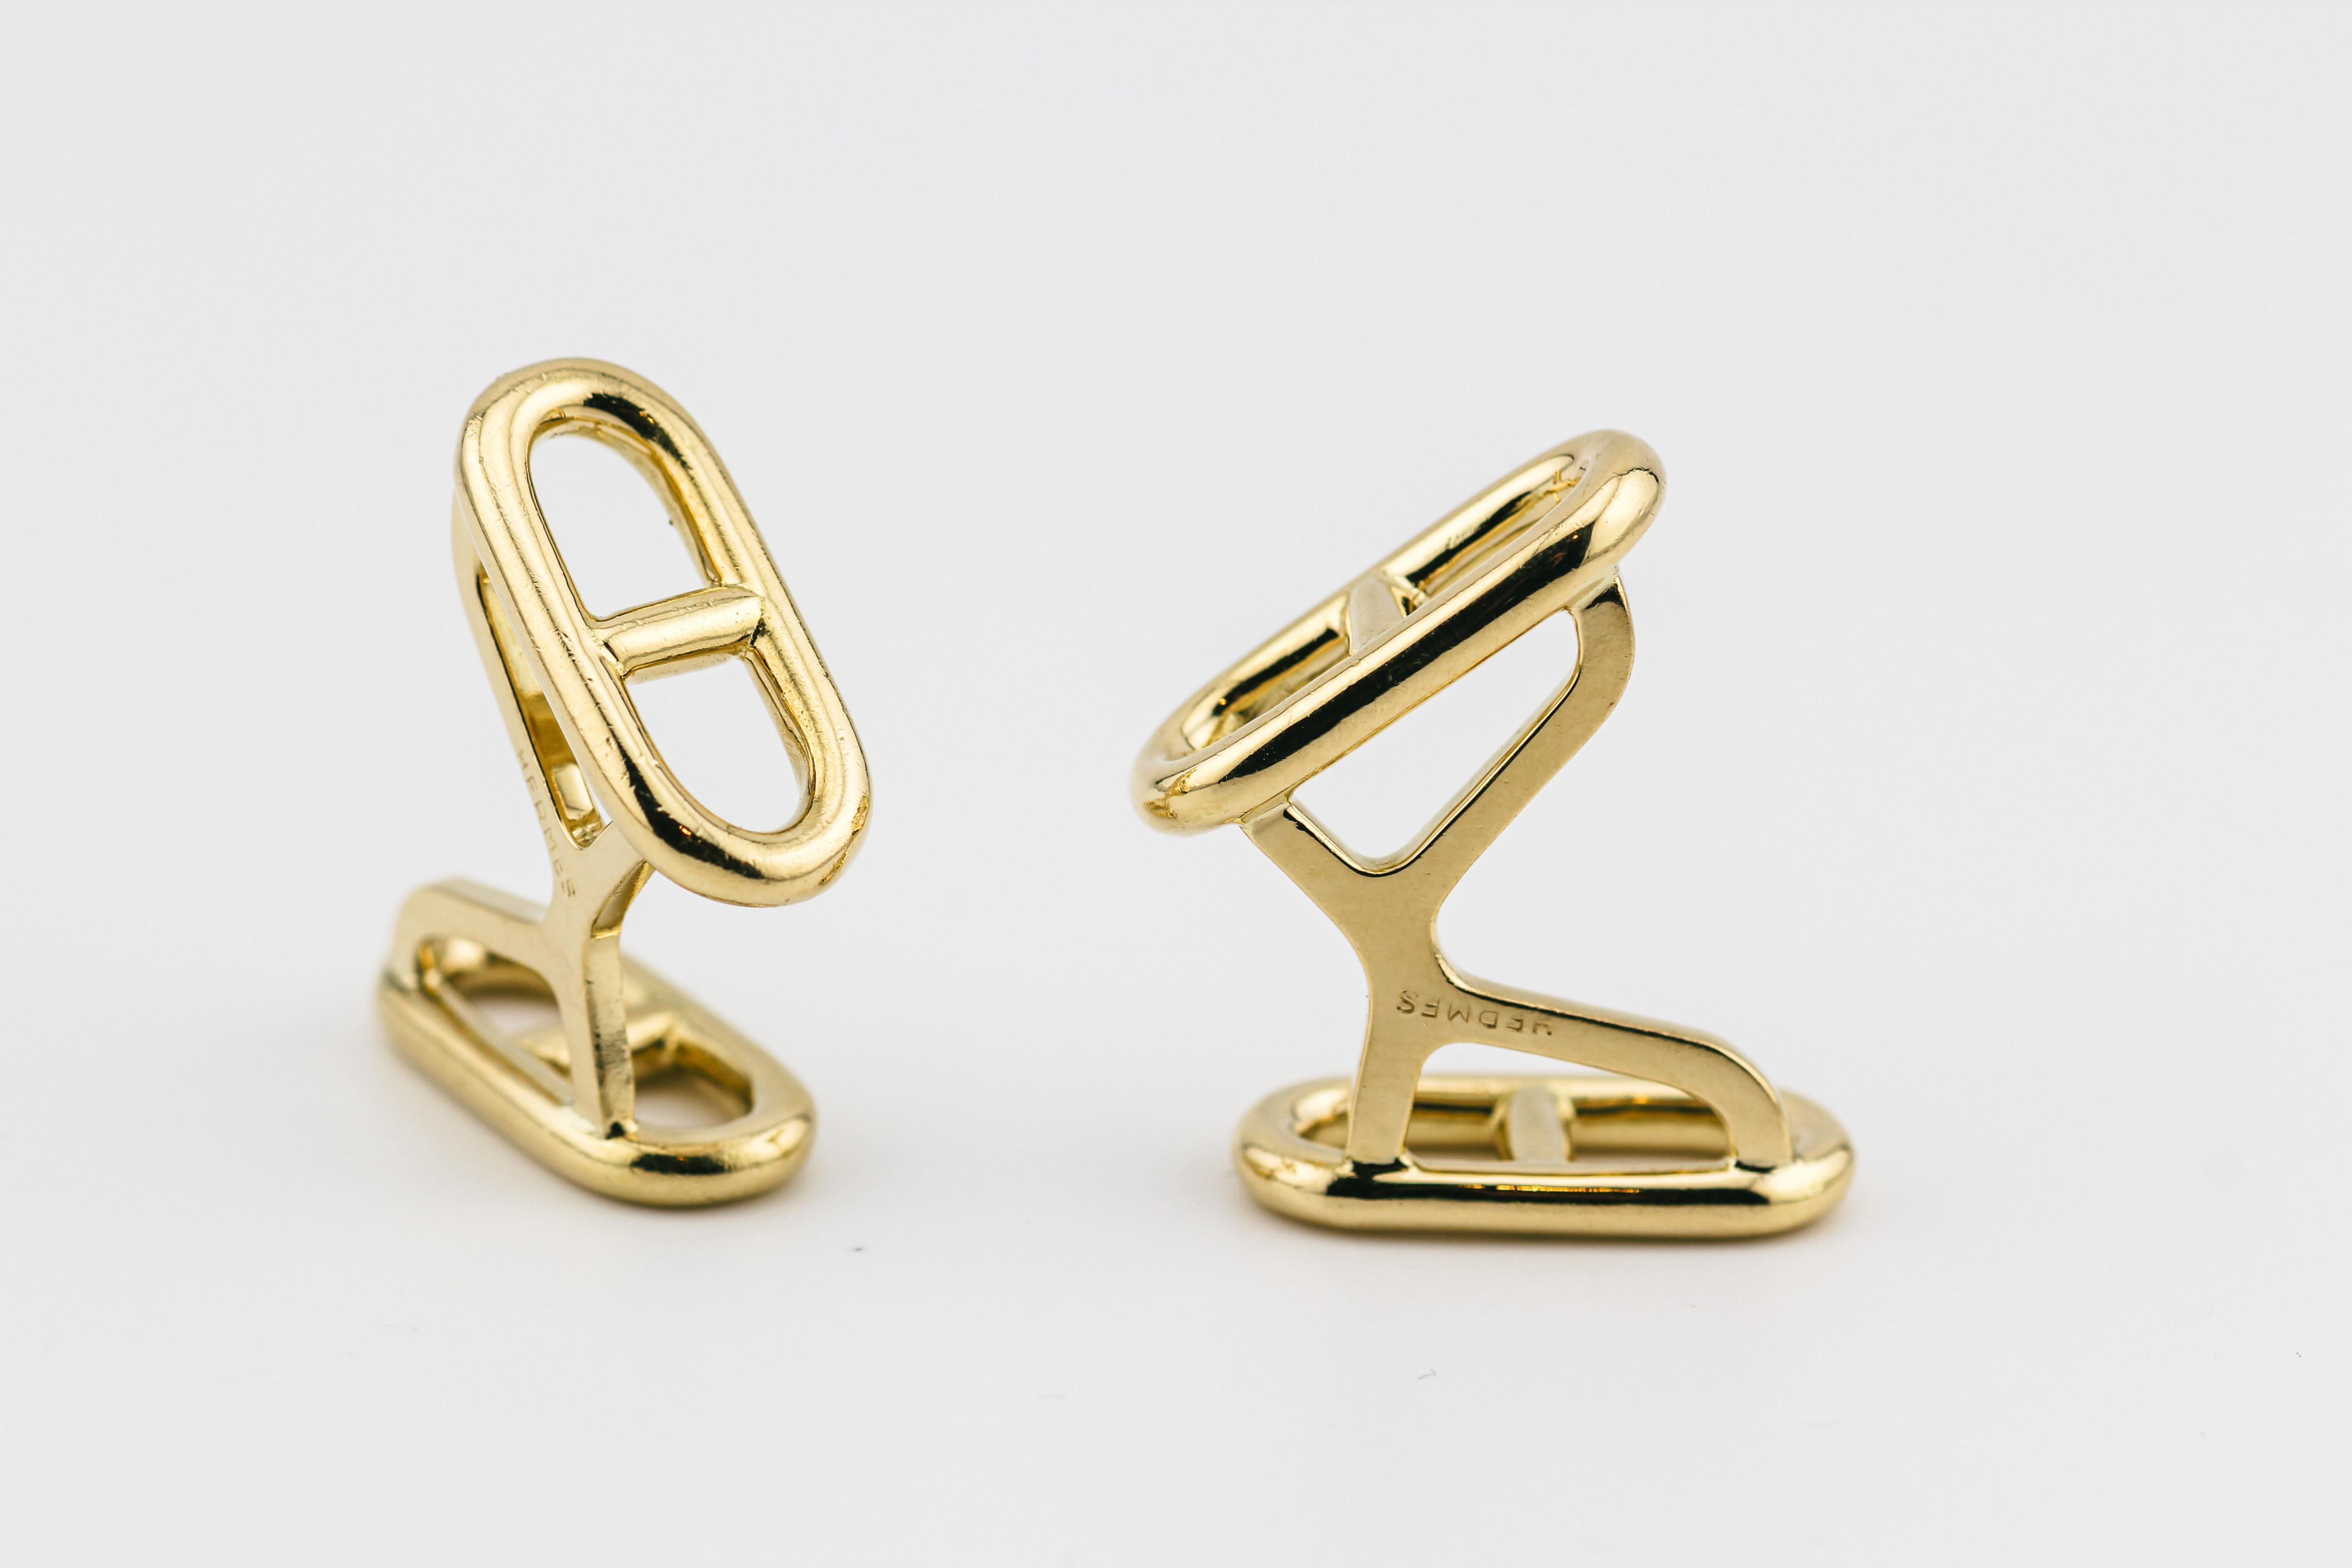 Hermes Vintage 1970s Chaine D'Ancre 18k Gold Cufflinks For Sale 3